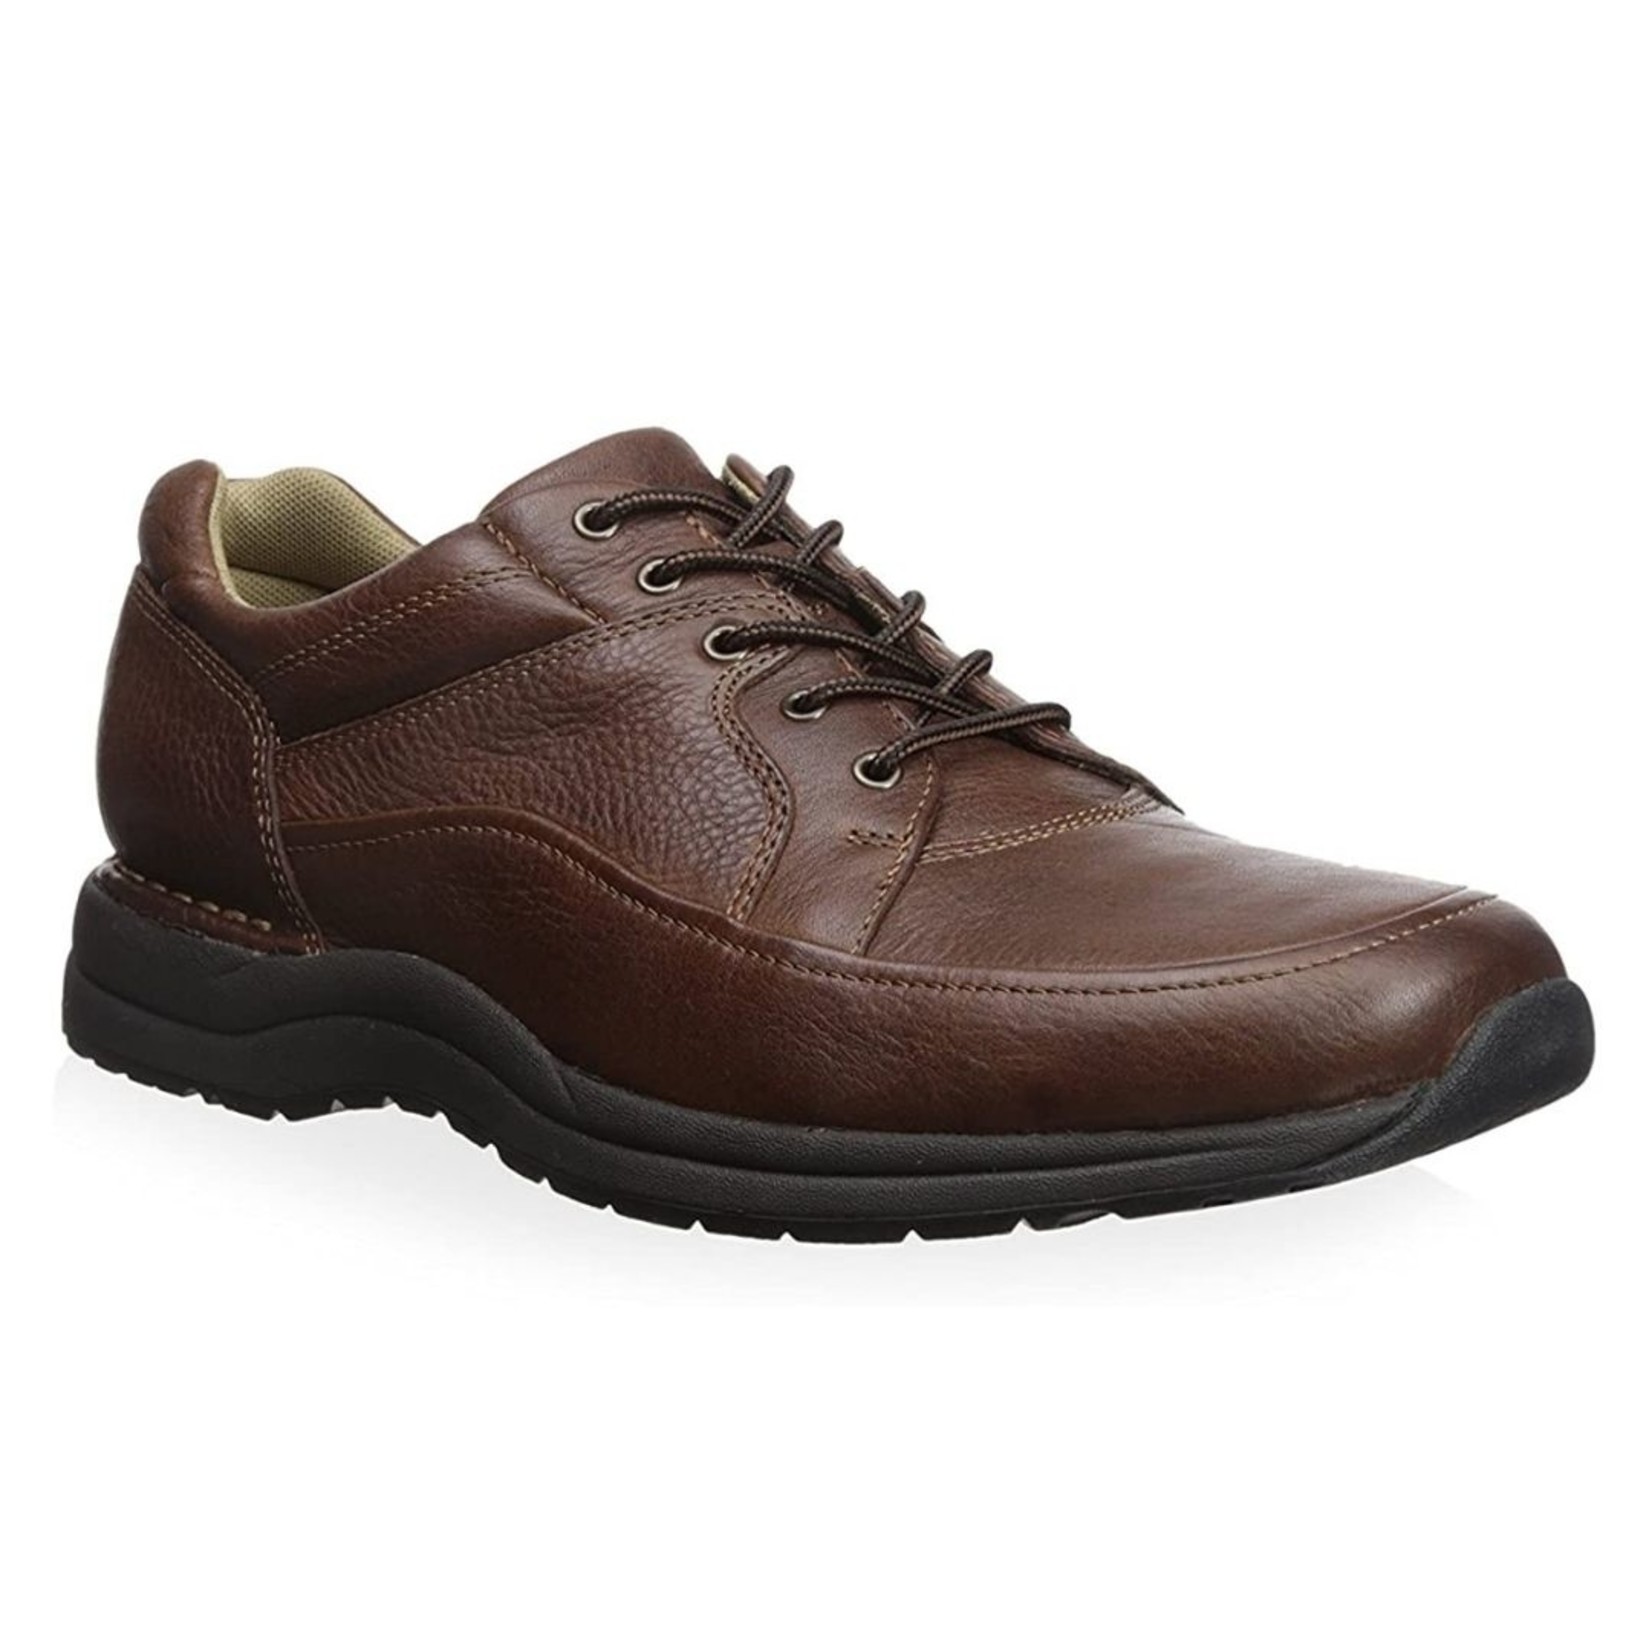 Rockport Work Safety Shoes & Boots for Men - Casual & Dress